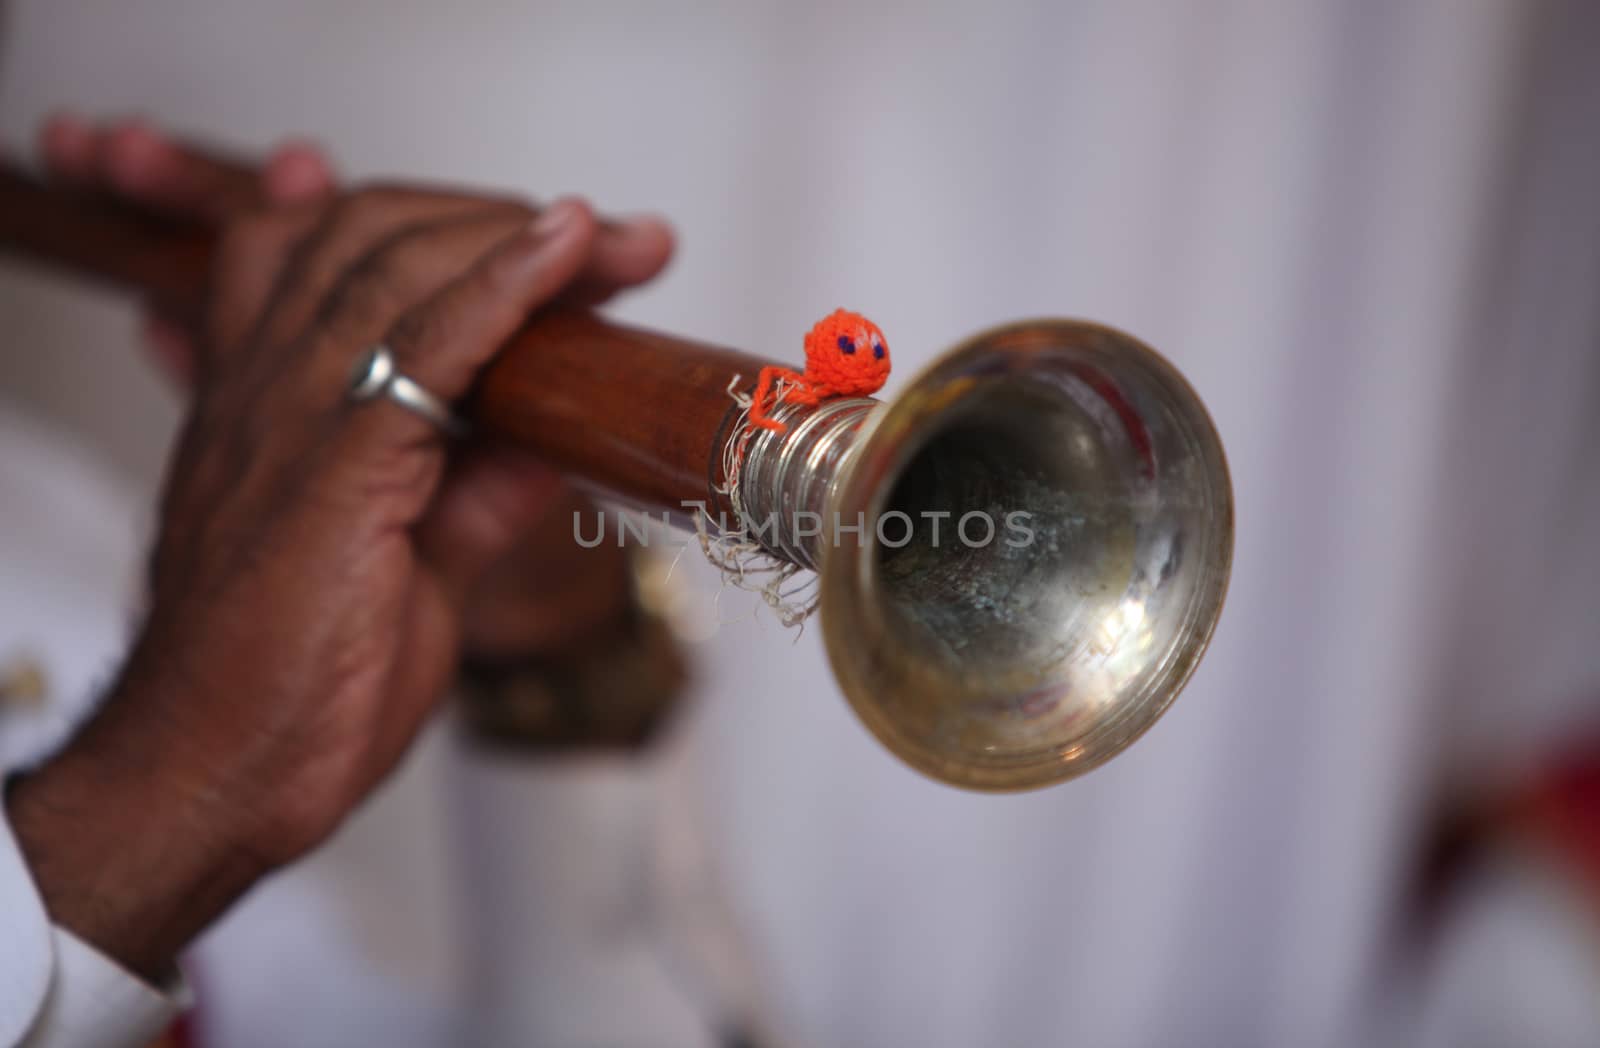 An ethnic Indian wind instrument called the been which plays a monotonous note.